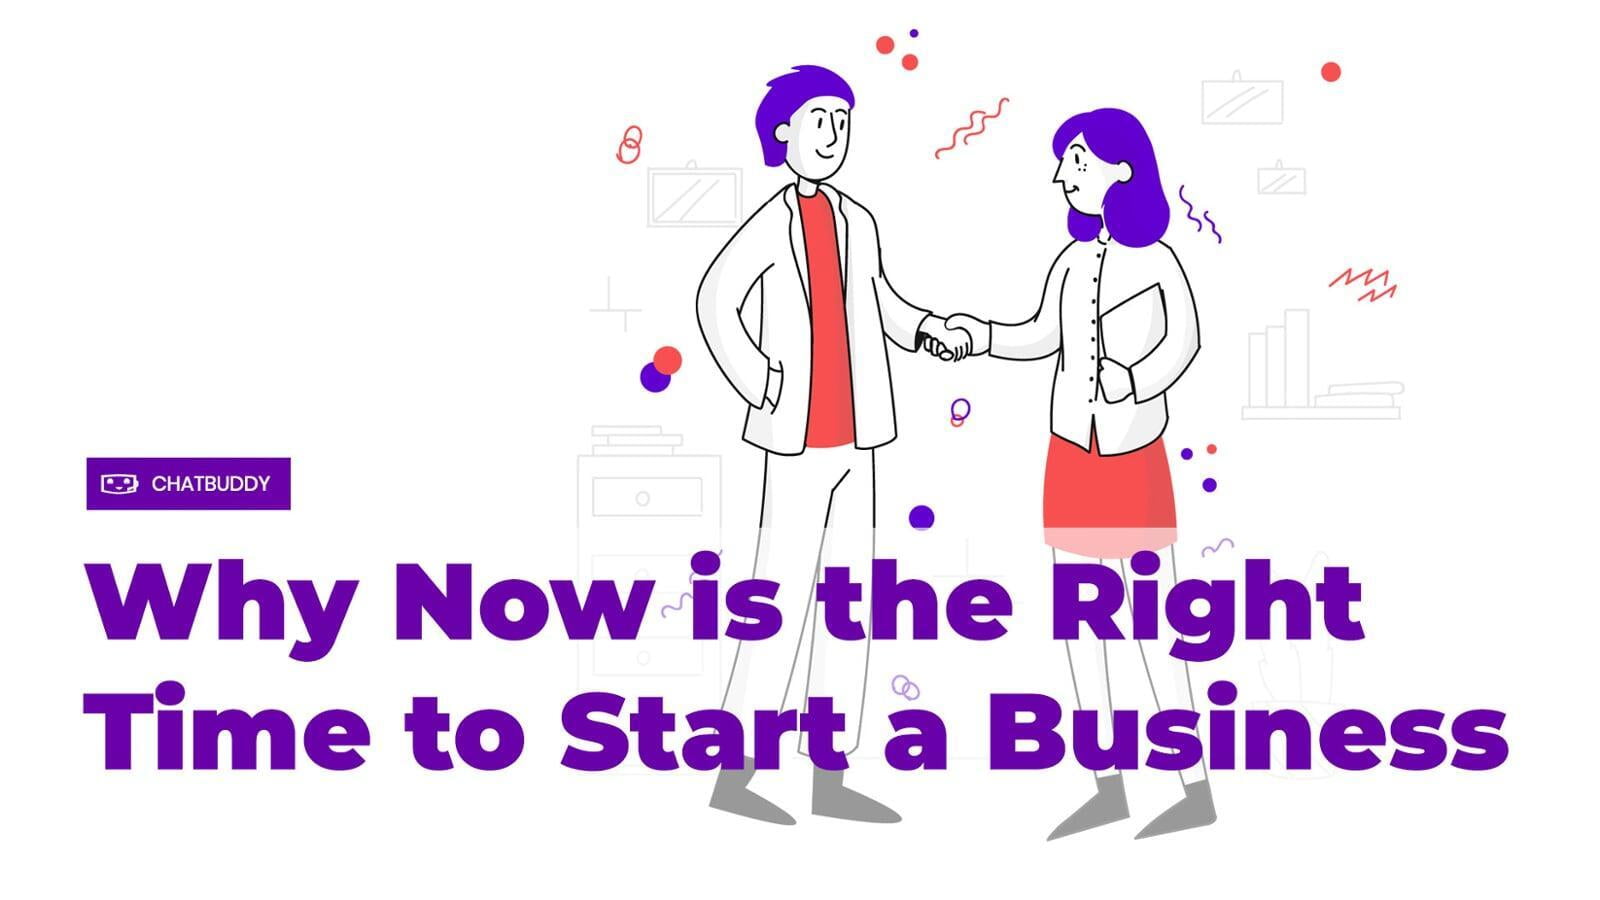 Why Now is the Right Time to Start a Business